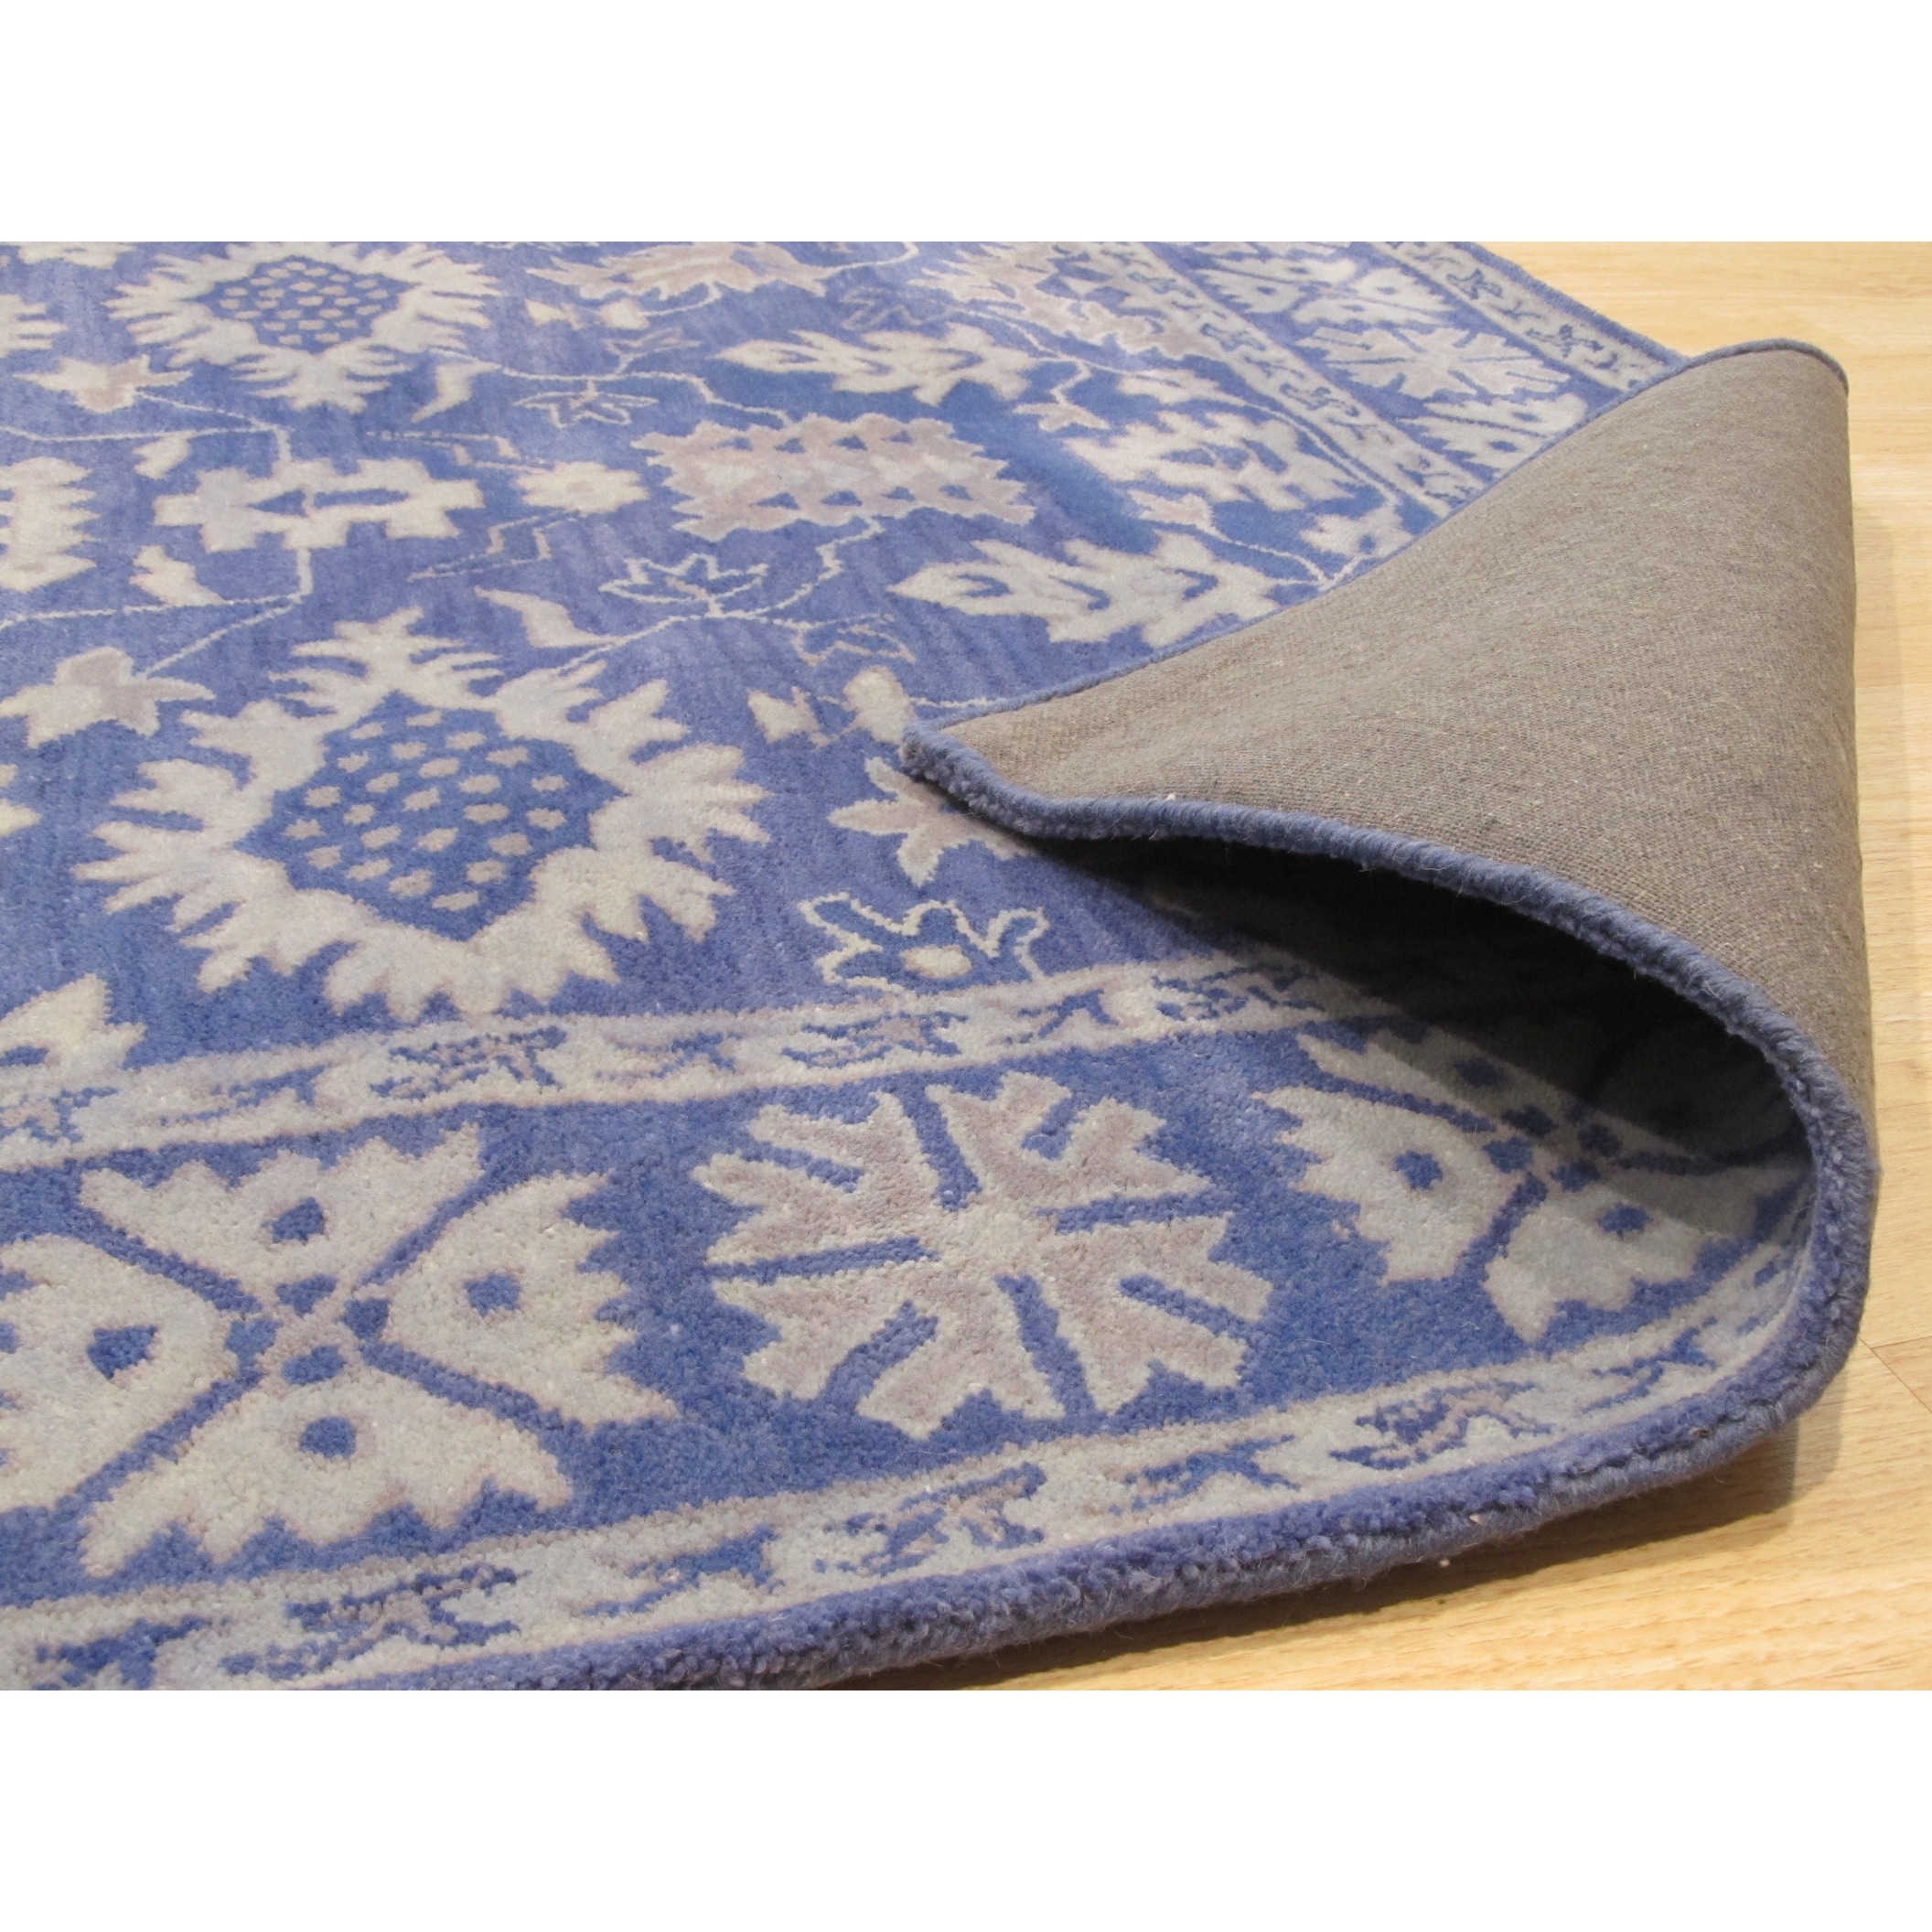 Blue 4' x 6' EORC IE85BL4X6 Hand-Tufted Wool Overdyed Rug 